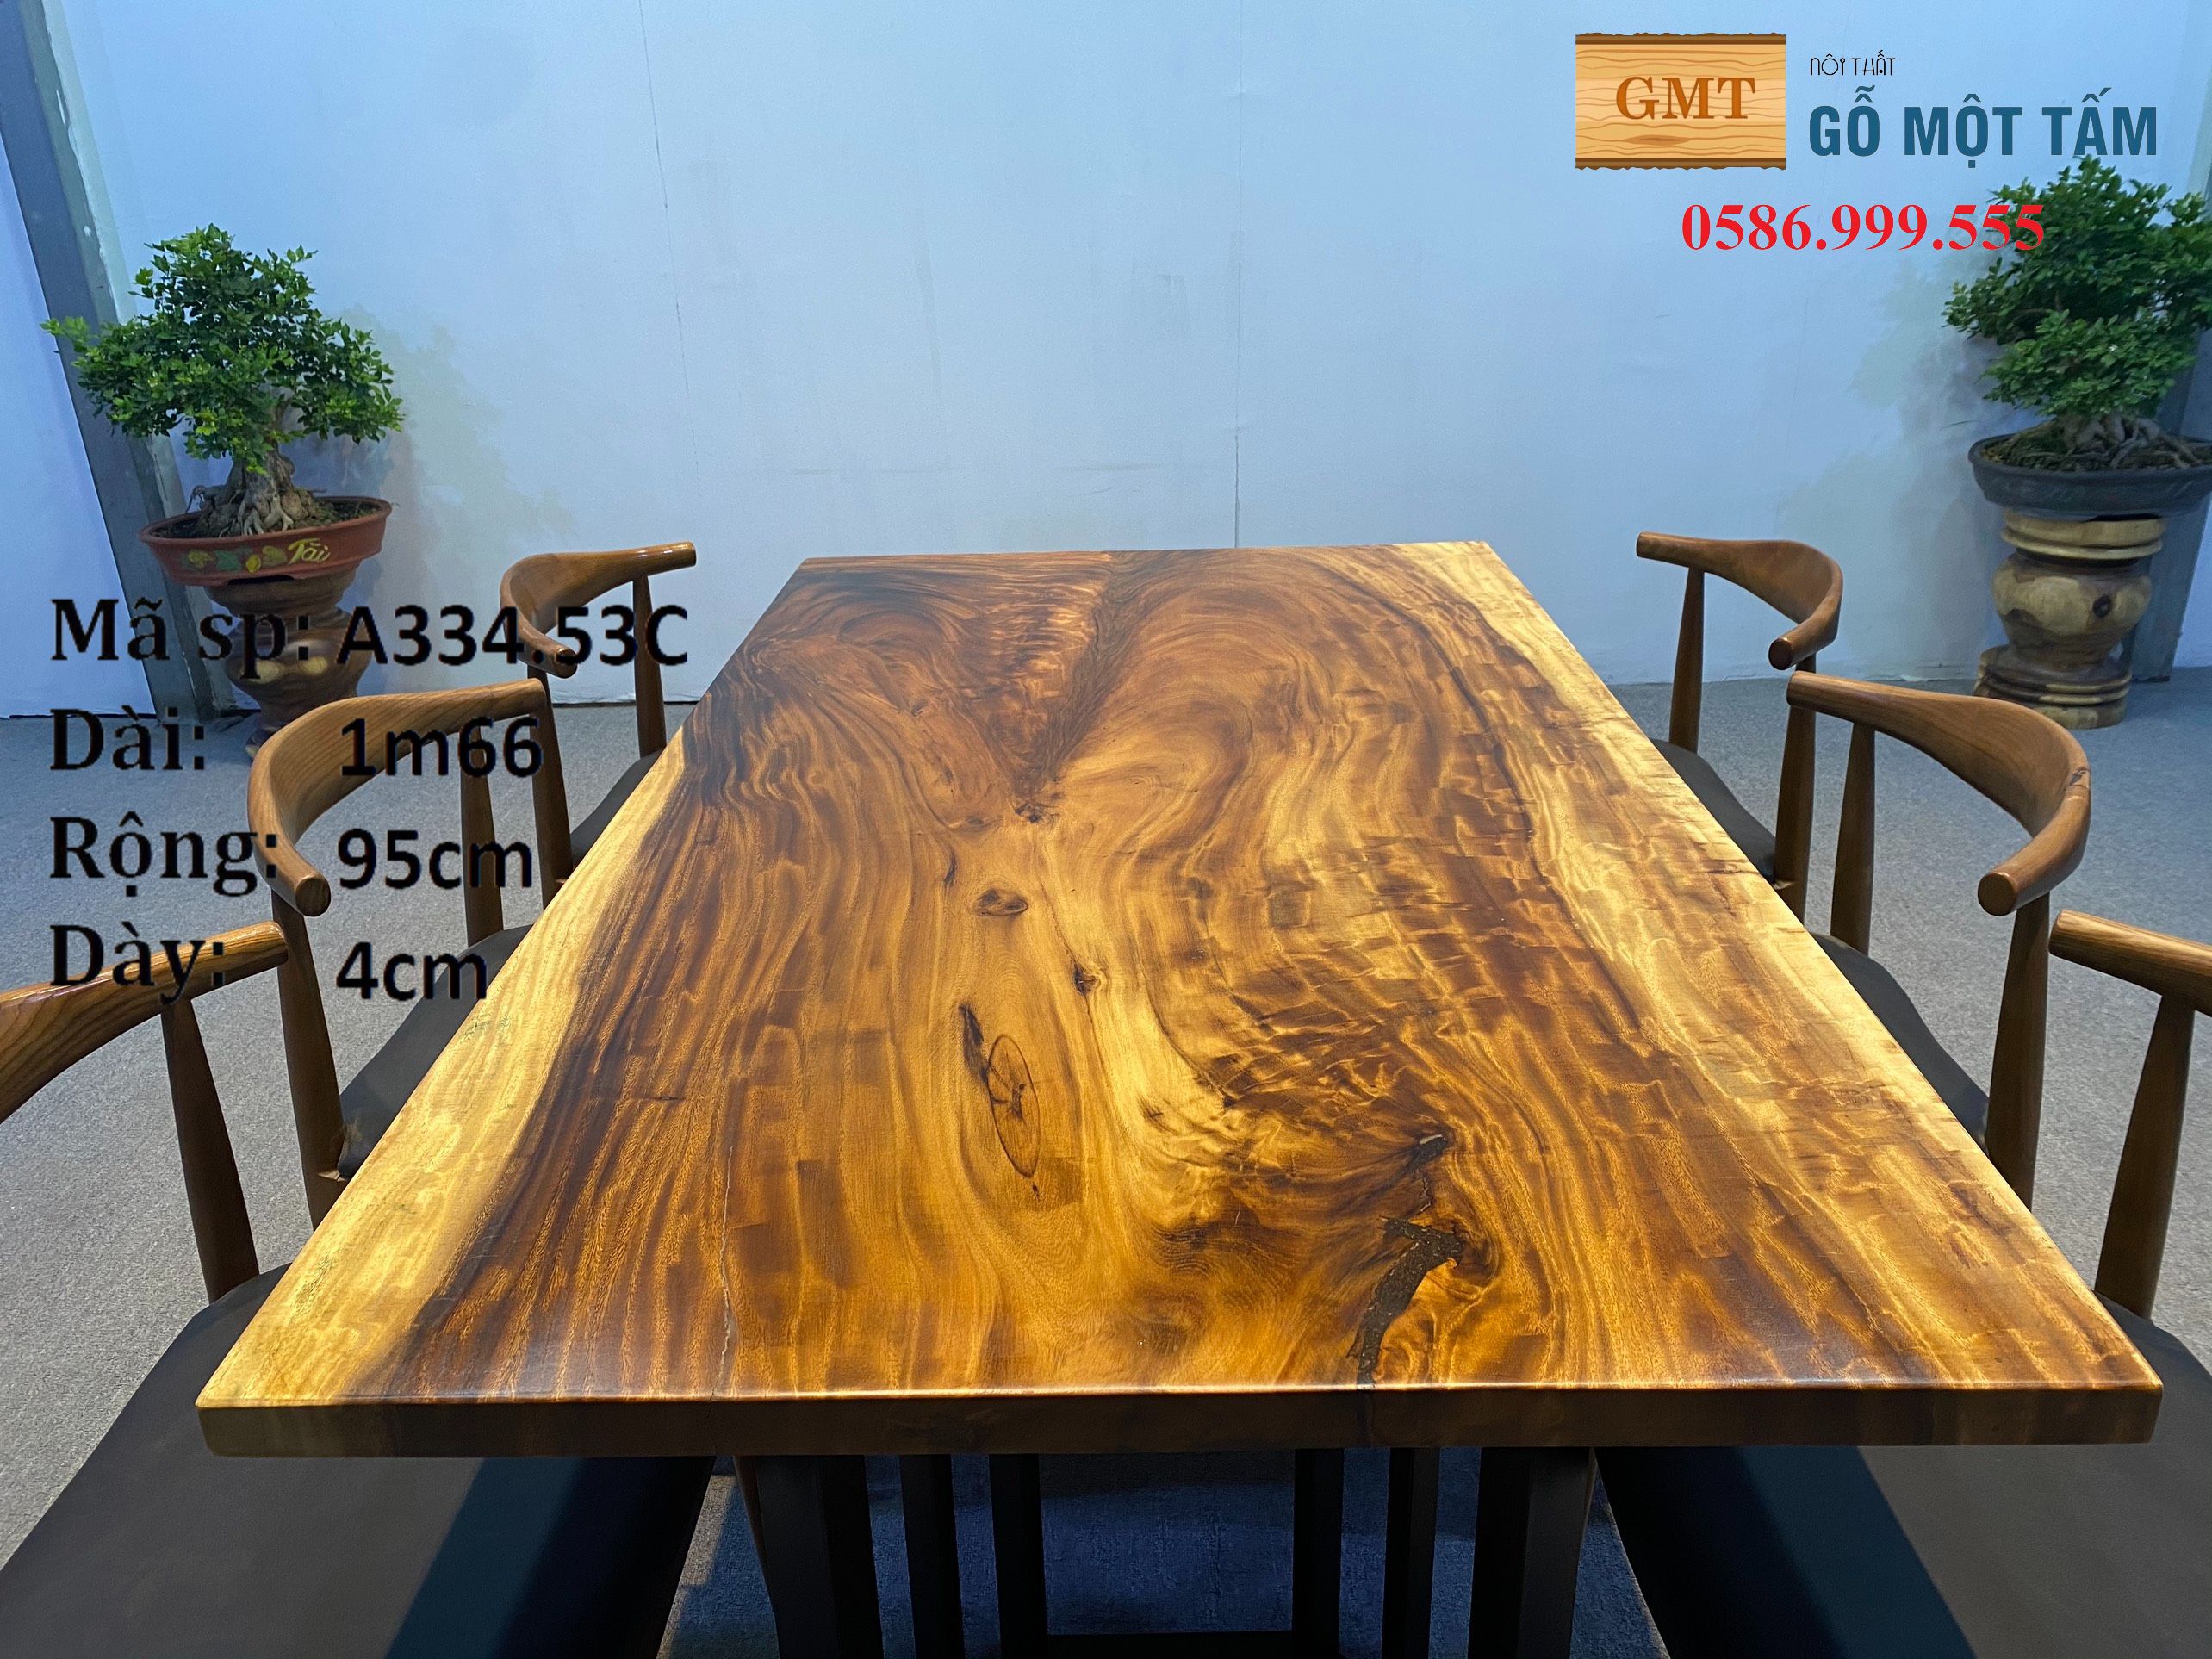 Dining table Wood me western A334 long 1m66 wide 95cm thick 4cm factory